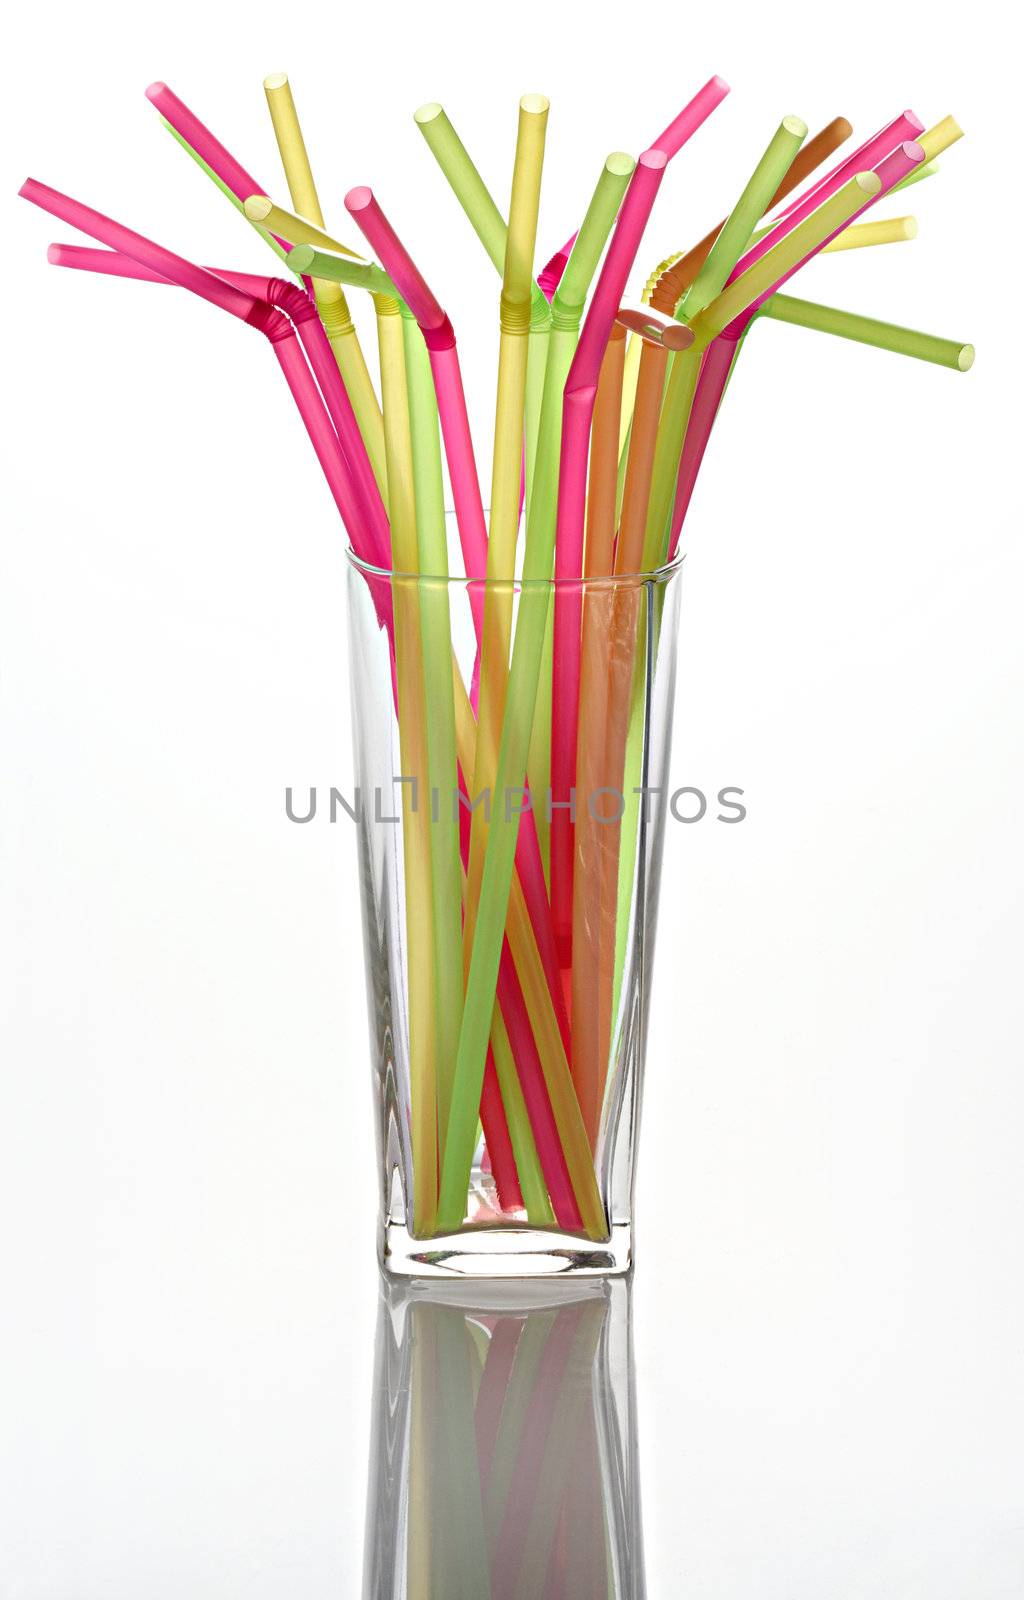 Straws for a cocktail by Gravicapa